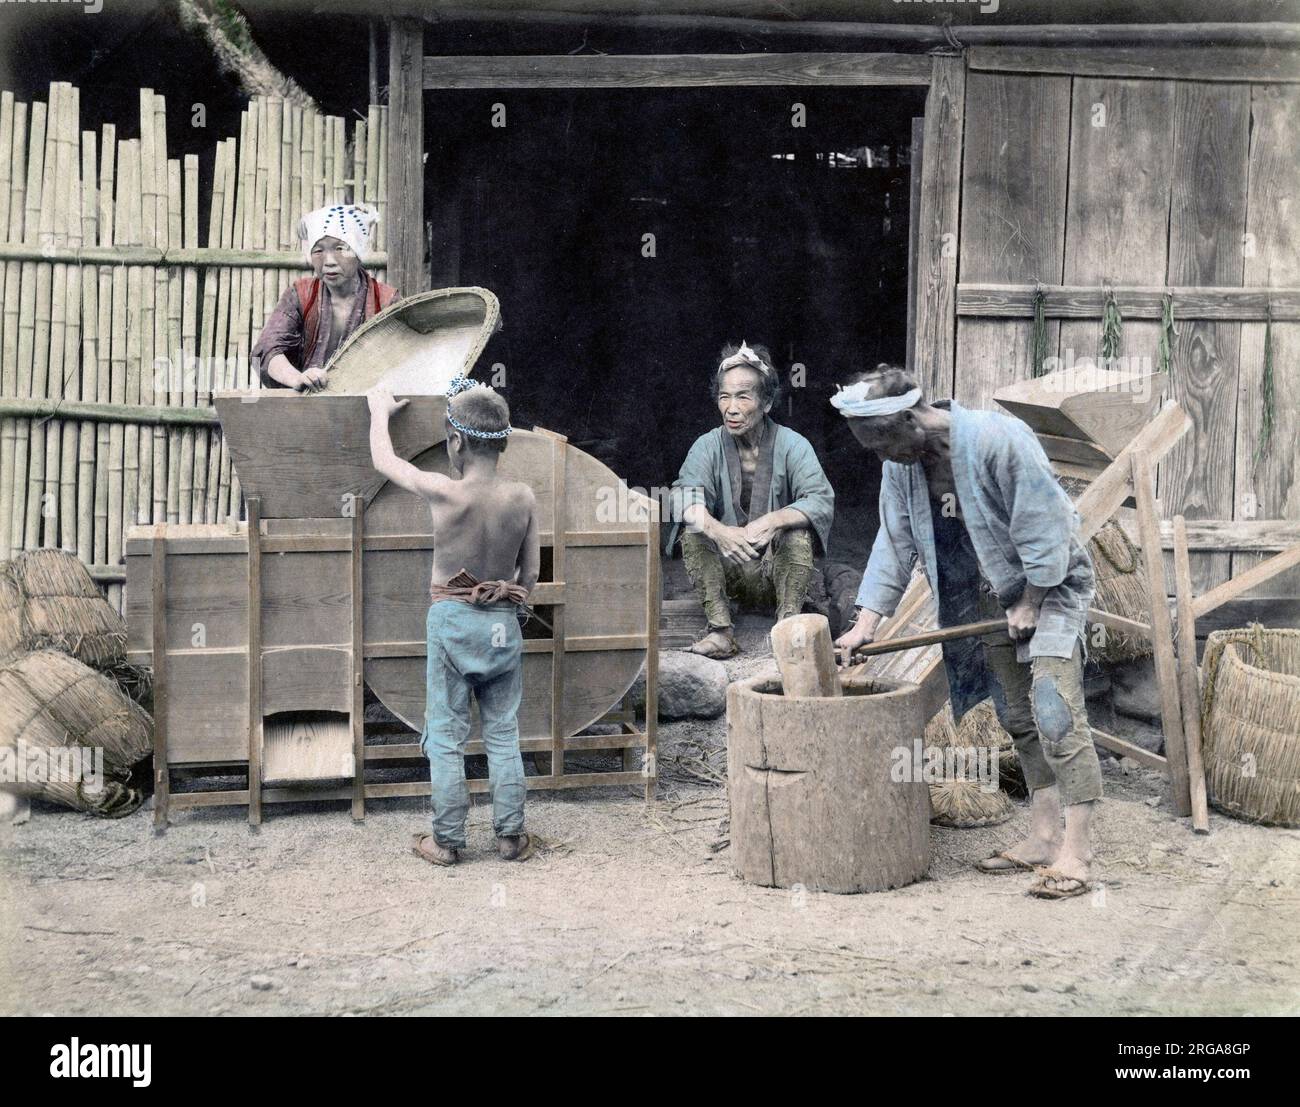 c.1880s Japan - cleaning and pounding rice Stock Photo